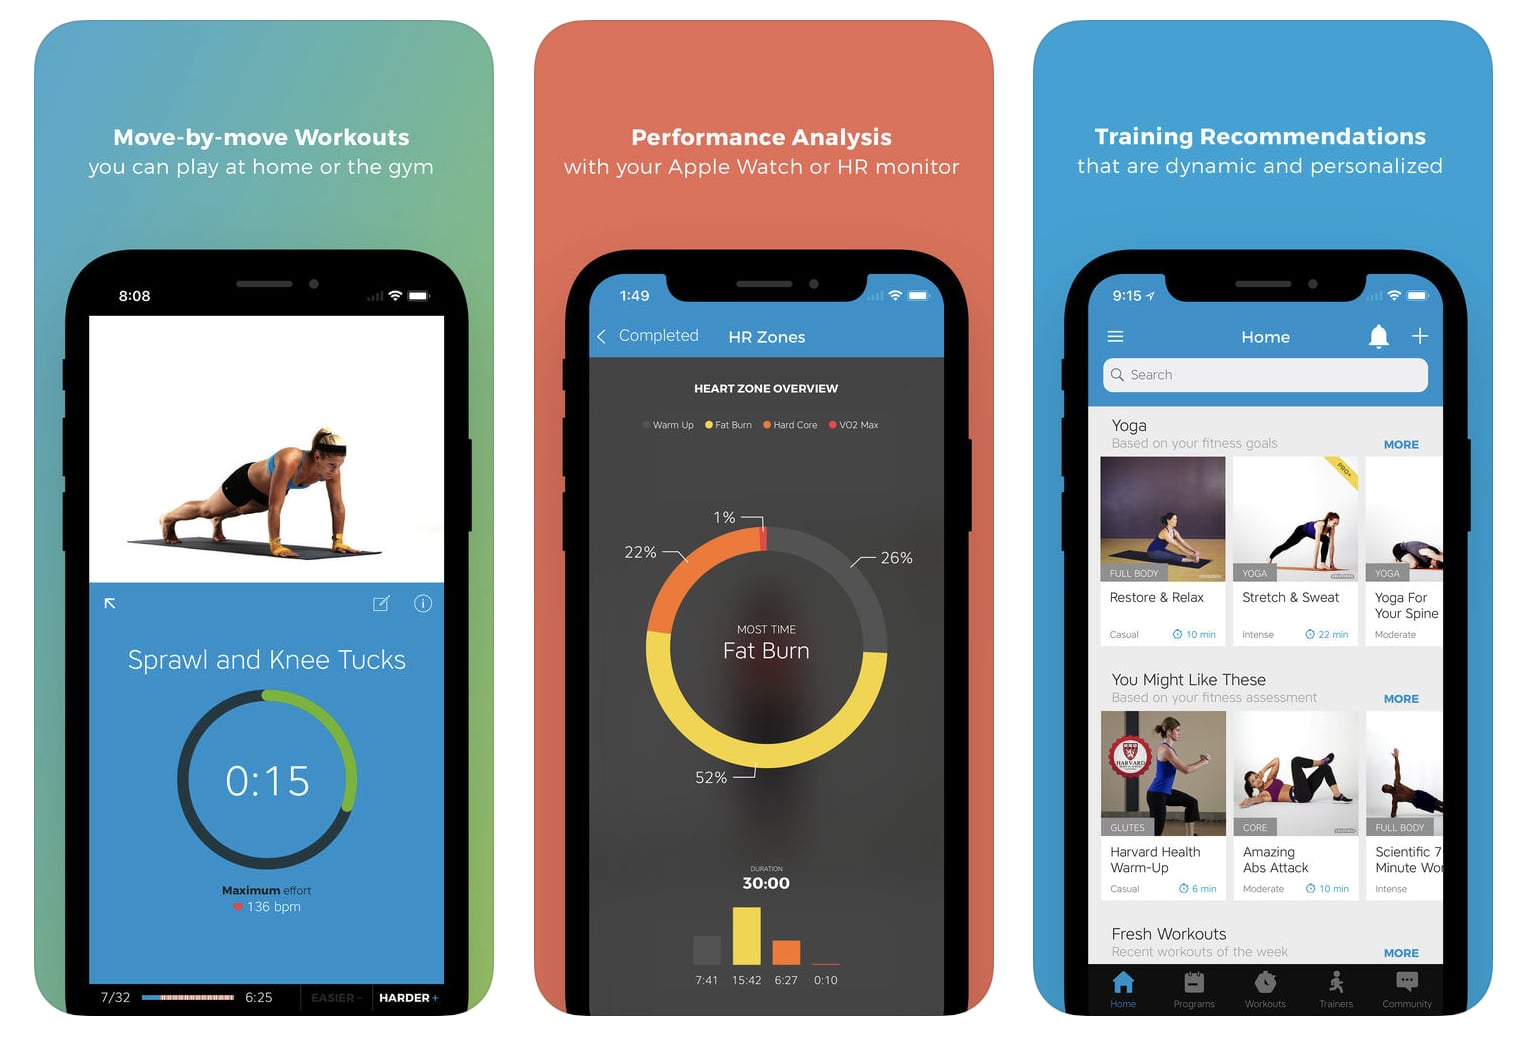 Getting the Most Out of Your Workout With a Fitness App